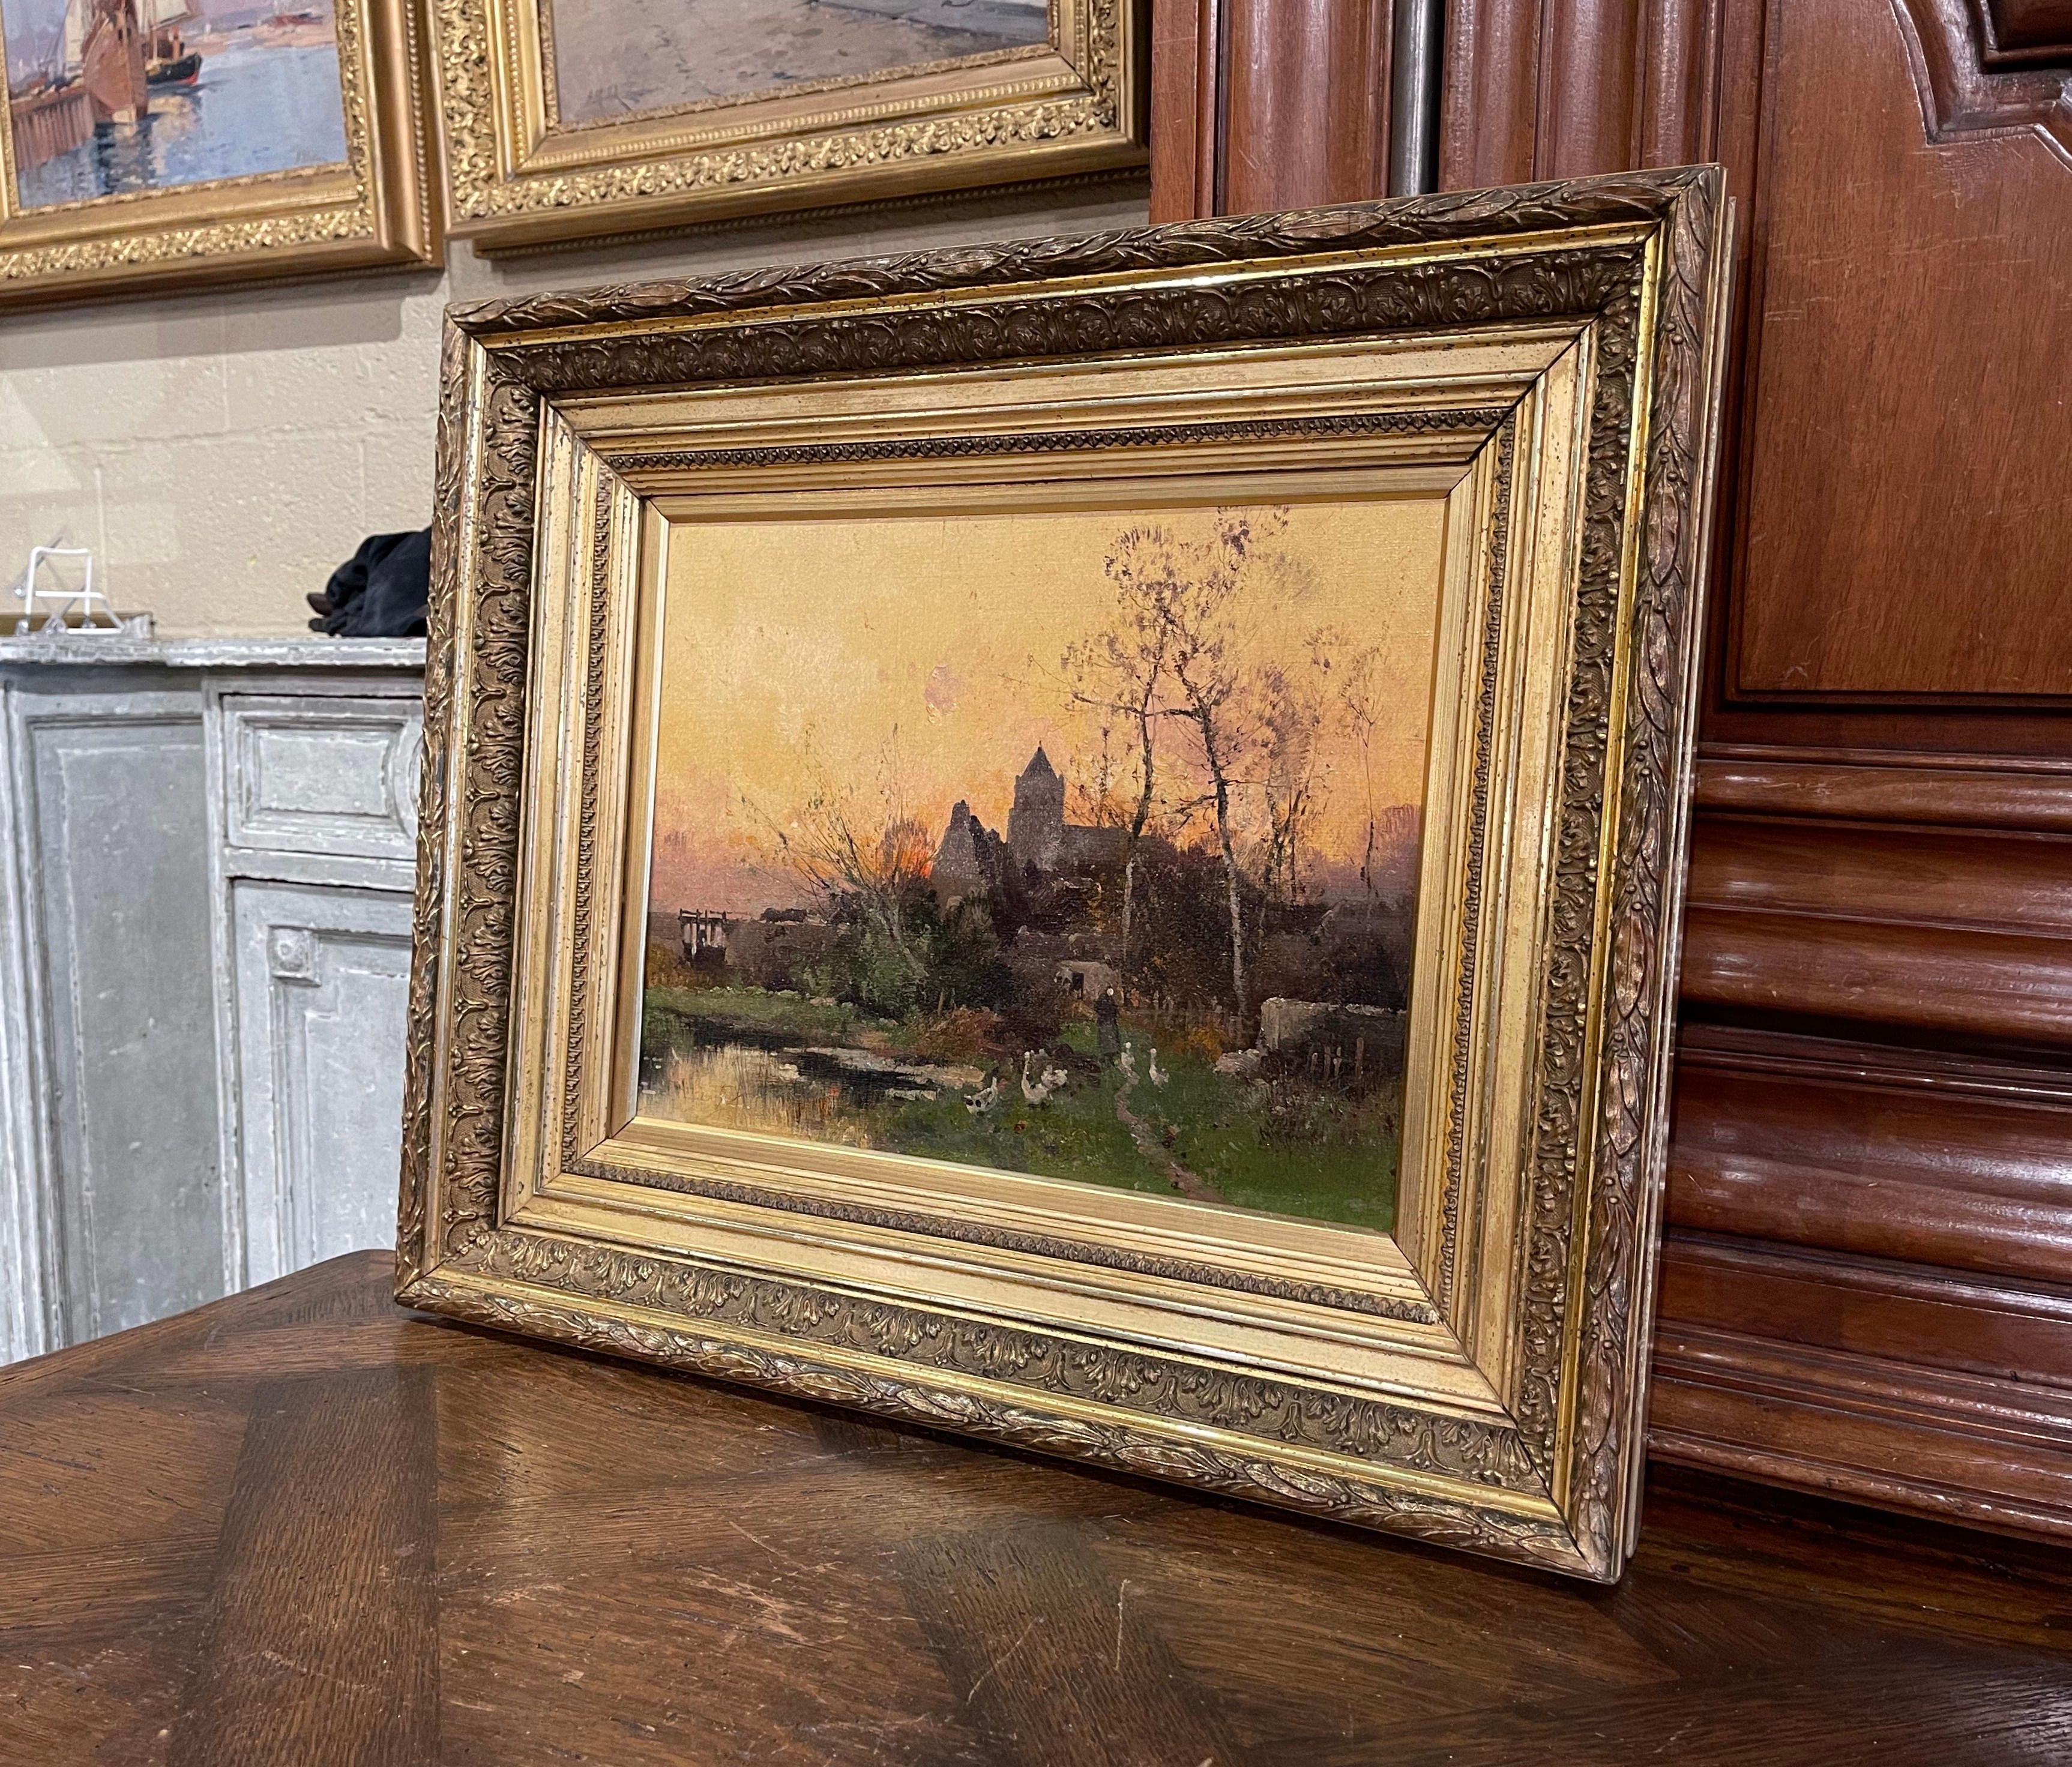 Decorate a study, living room or den with this beautiful and colorful antique oil painting! Painted in France circa 1890, the artwork is set in the original carved gilt wood frame; it illustrates a picturesque, country scene in rural France with a